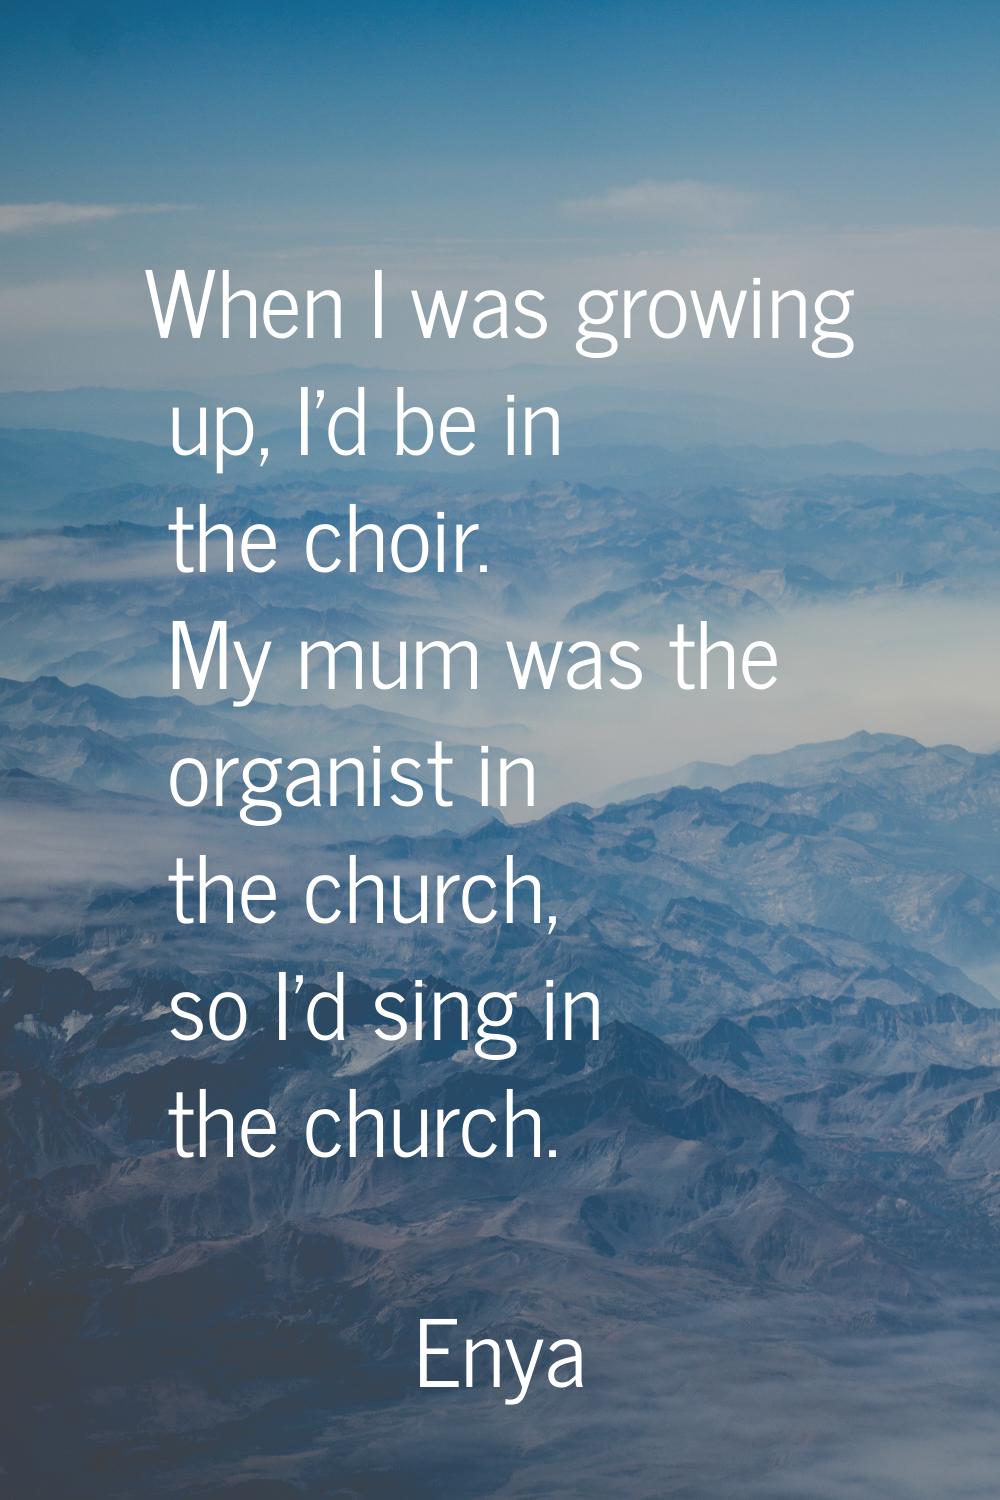 When I was growing up, I'd be in the choir. My mum was the organist in the church, so I'd sing in t